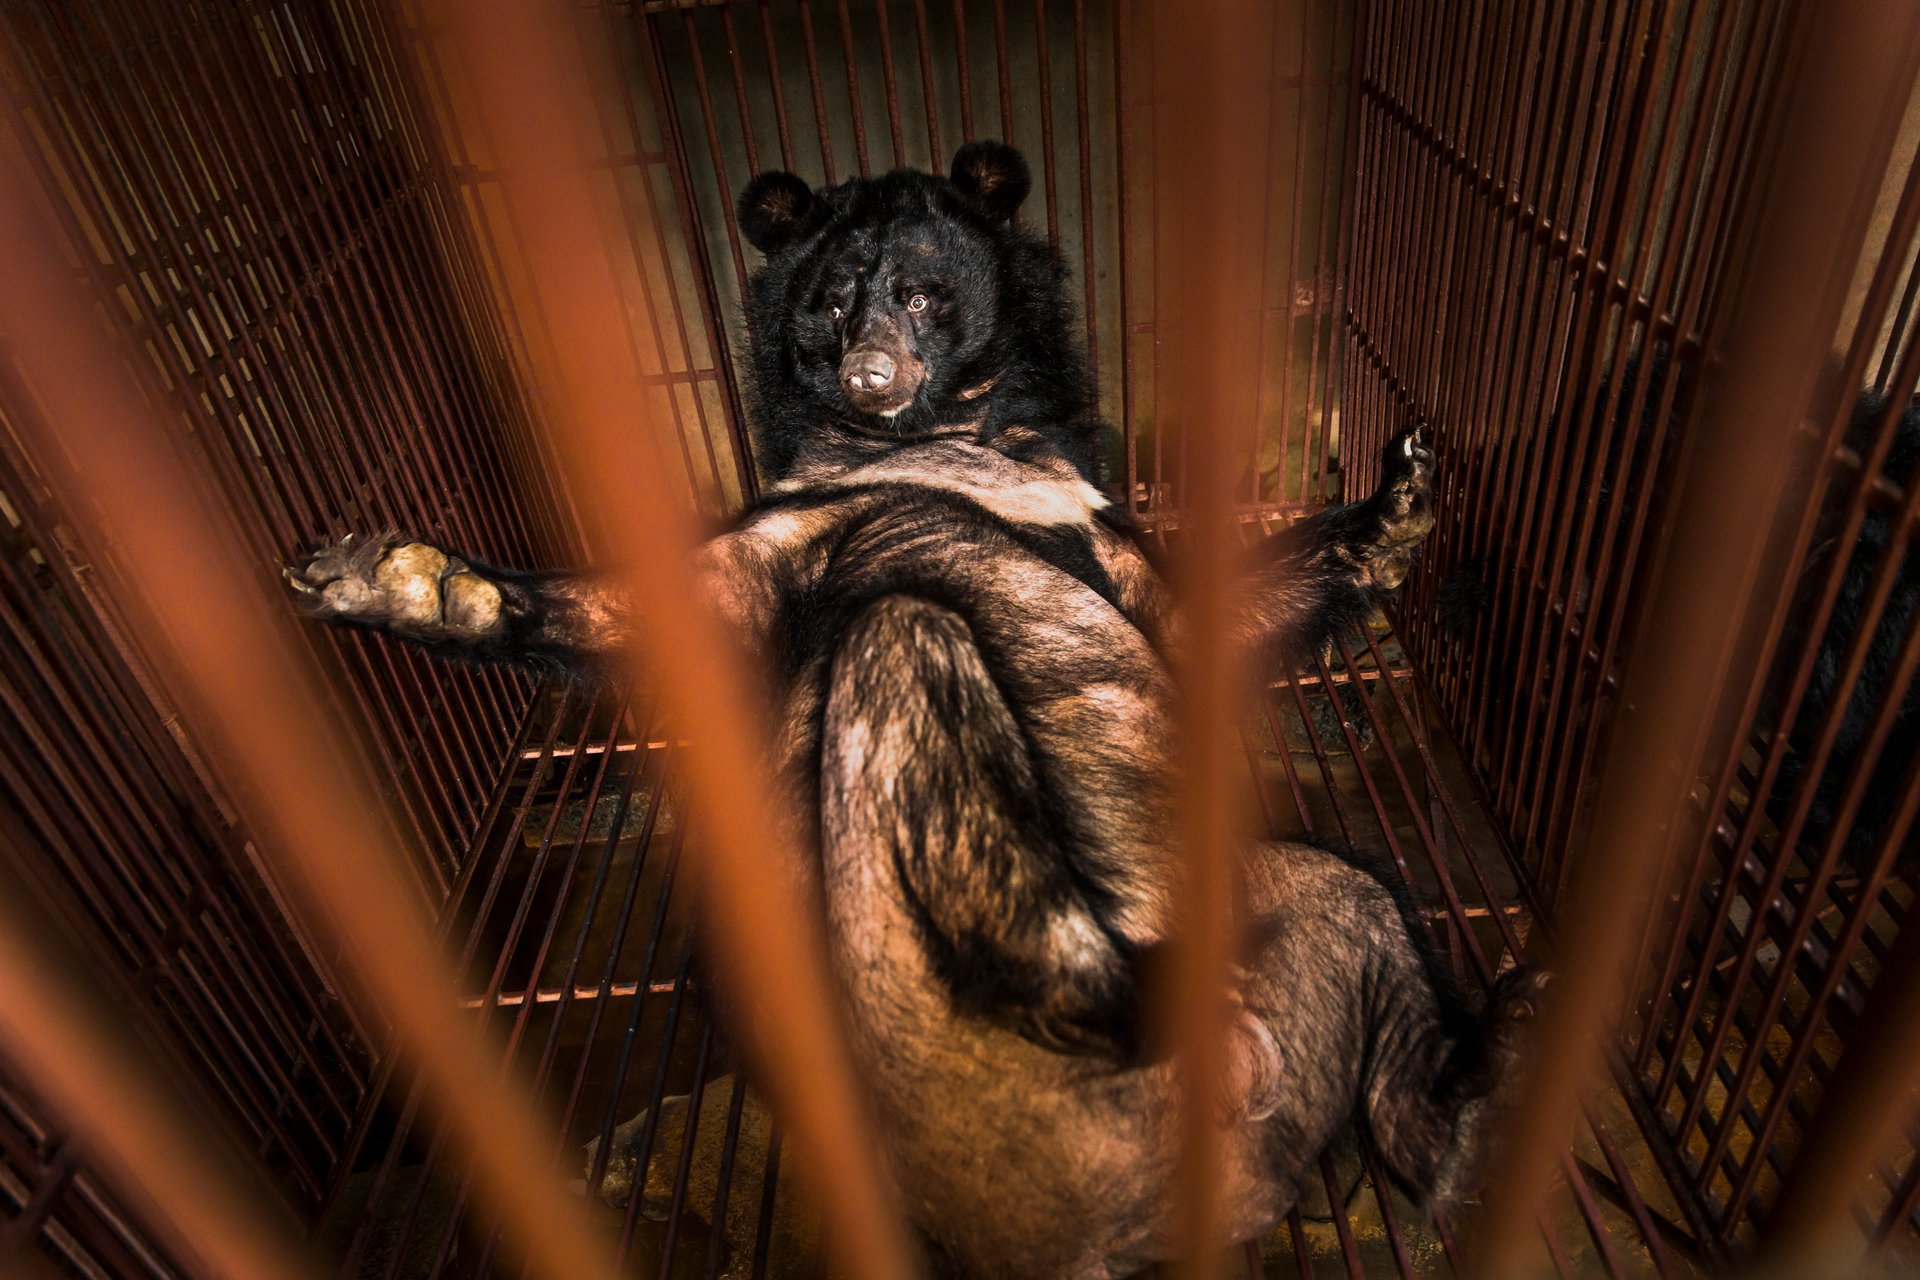 This bear has lost fur, possibly due to the stress of living in cramped conditions. World Animal Protection trained a local veterinary team in Hanoi, Vietnam (which we co-fund with the Hanoi Forestry Protection Department), to insert microchips that will help prevent new bears being poached from the wild and used in the bile industry.